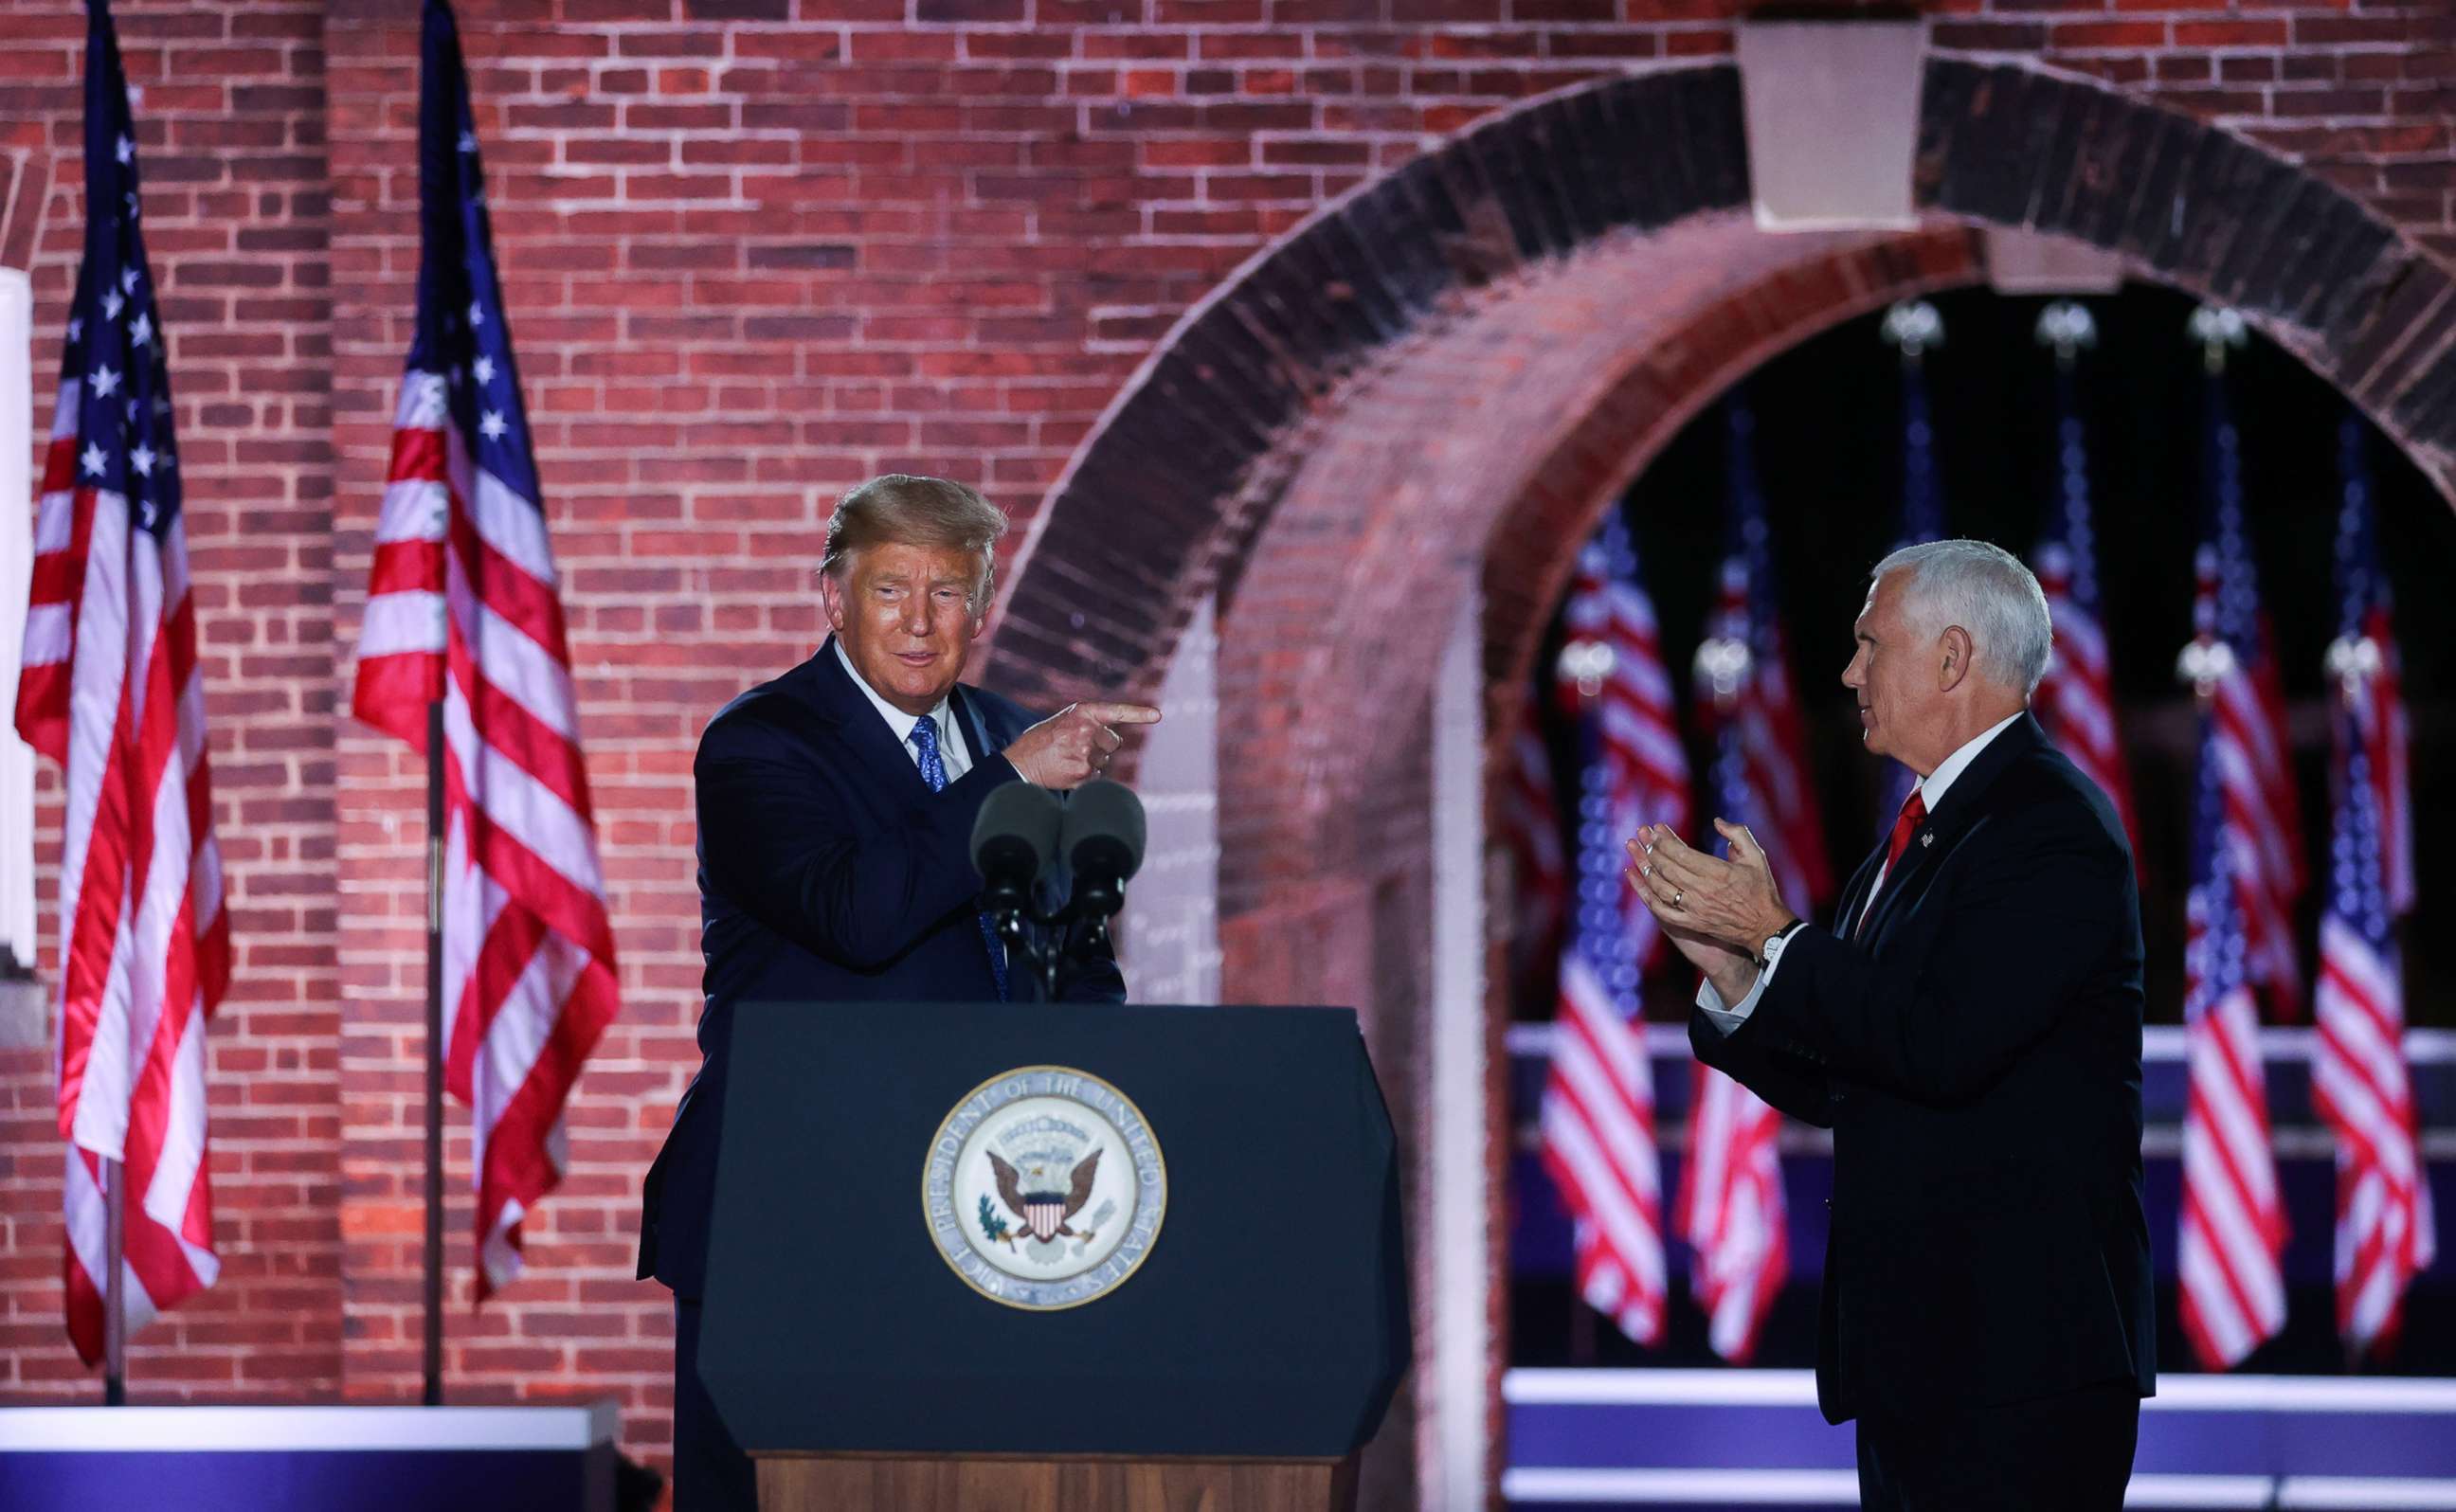 PHOTO: Vice President Mike Pence is joined onstage by President Donald Trump after delivering his acceptance speech during an event of the 2020 Republican National Convention held at Fort McHenry in Baltimore, Aug. 26, 2020. REUTERS/Jonathan Ernst